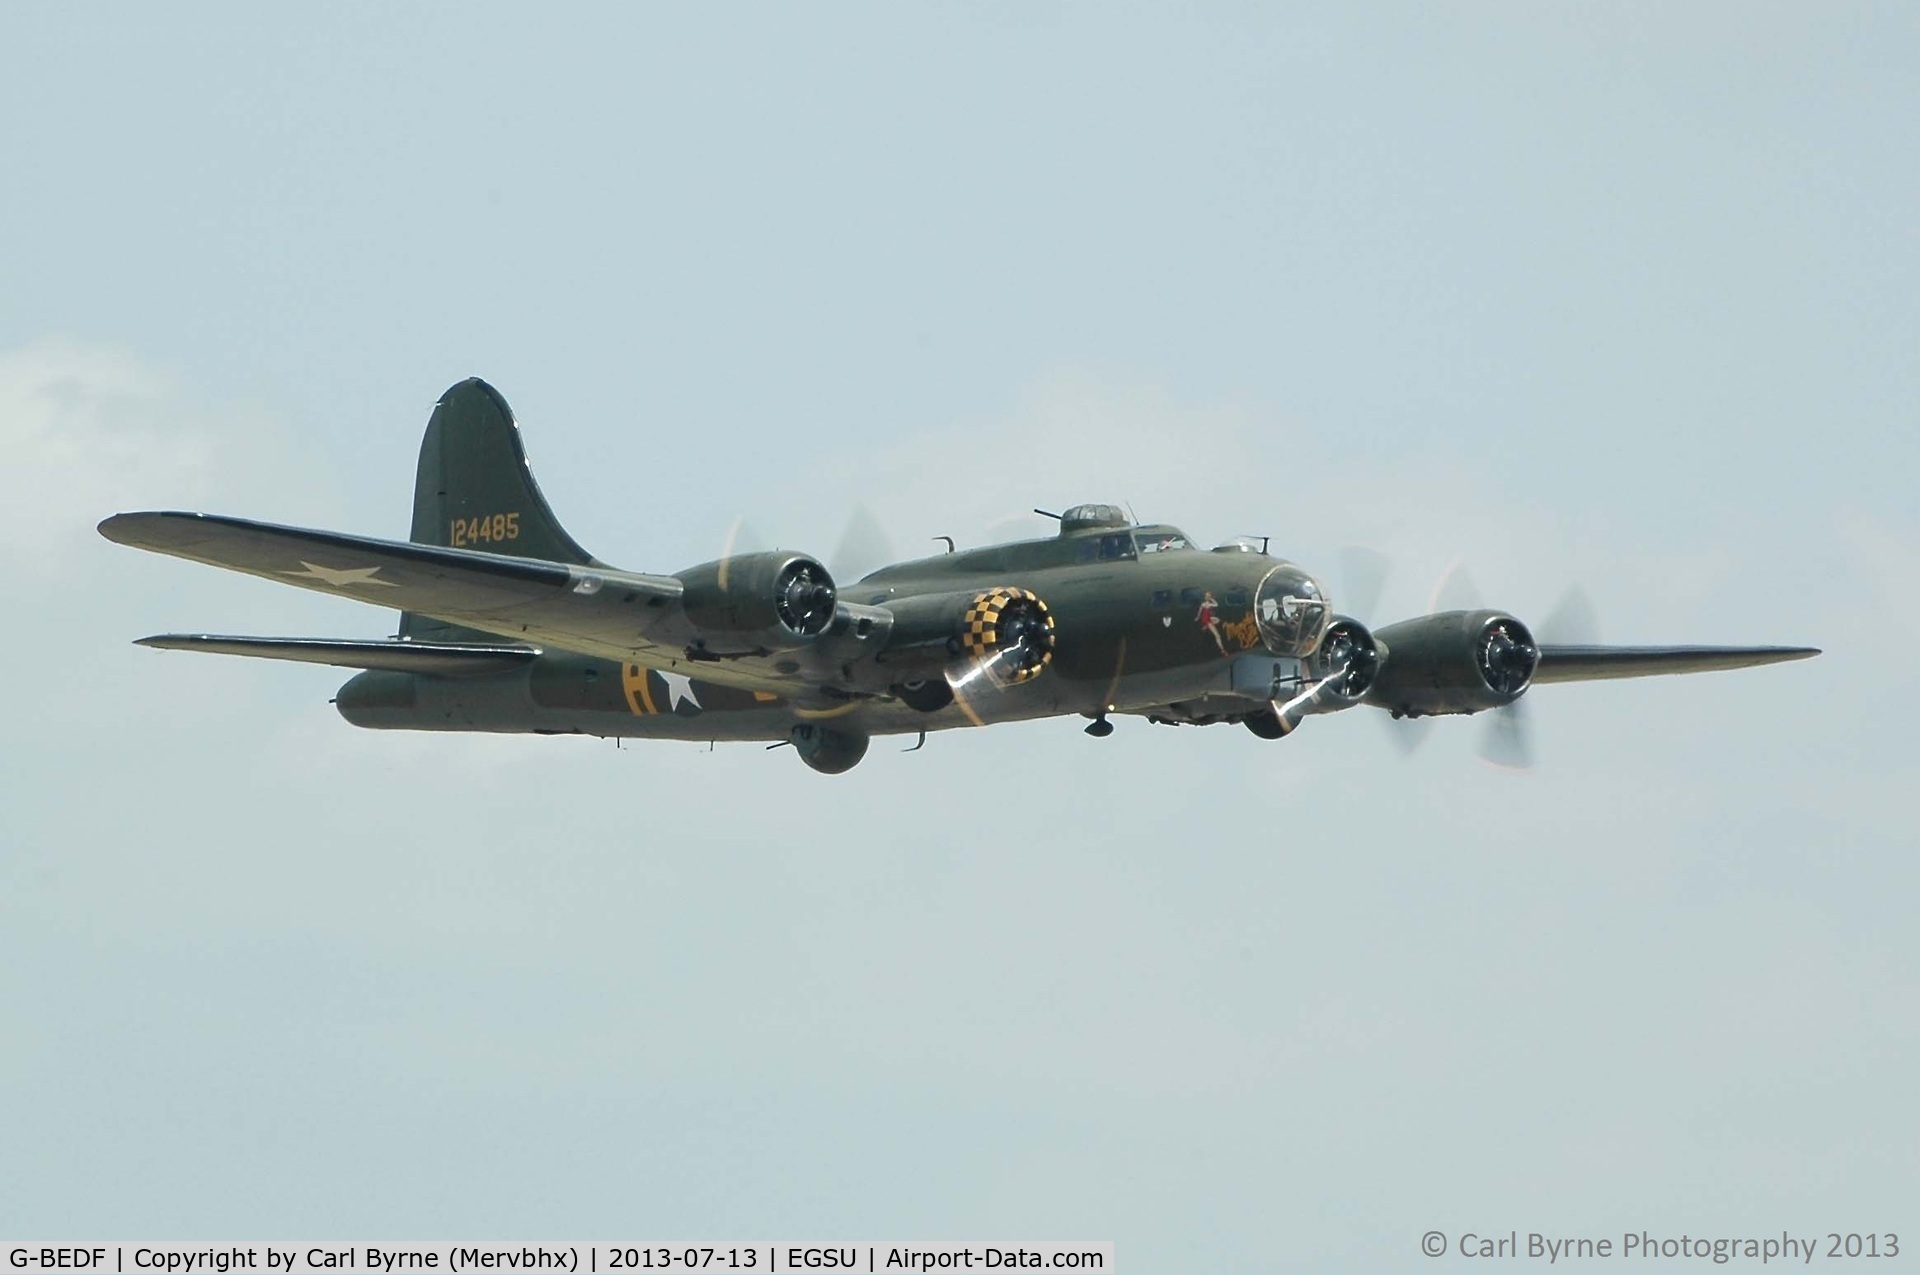 G-BEDF, 1944 Boeing B-17G Flying Fortress C/N 8693, Flying as part of the 